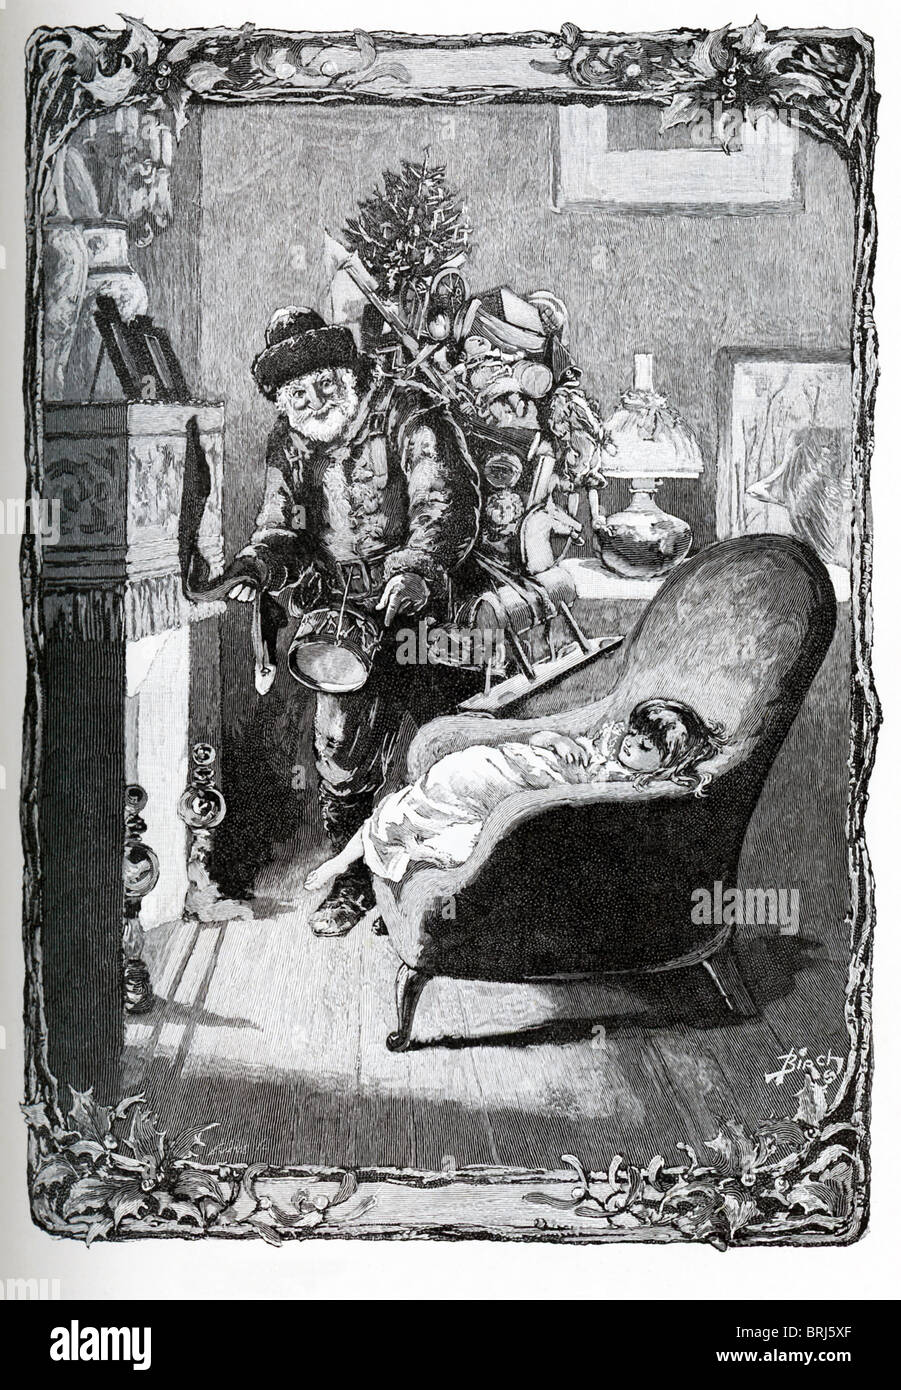 This illustration of Santa Claus stopping at the house of a young girl on Christmas Eve is from St. Nicholas, December 1887. Stock Photo